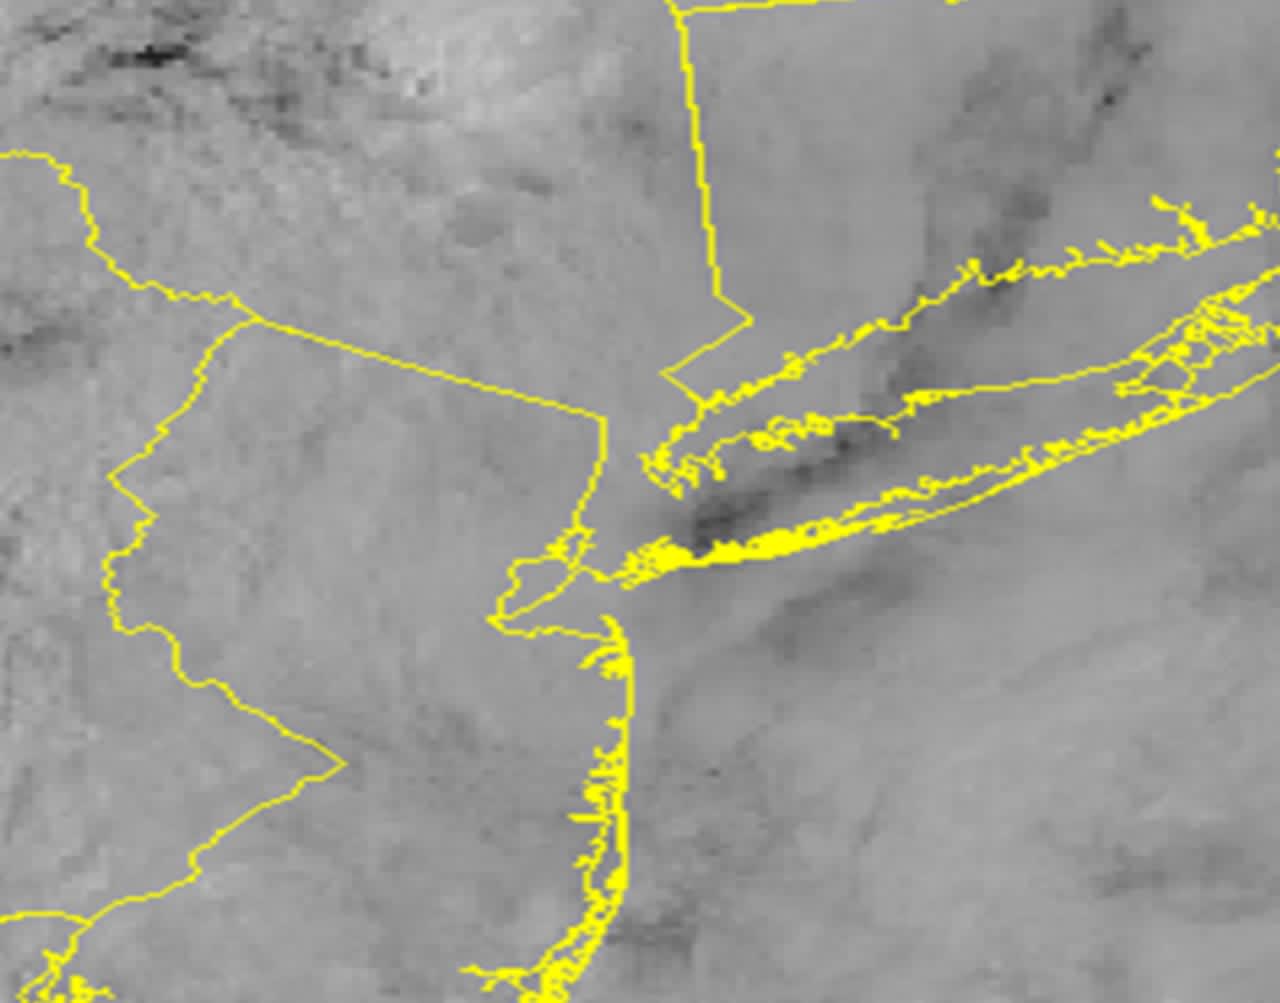 A satellite image of the region mid-morning Saturday shows low stratus and Strato cumulus clouds covering the area.